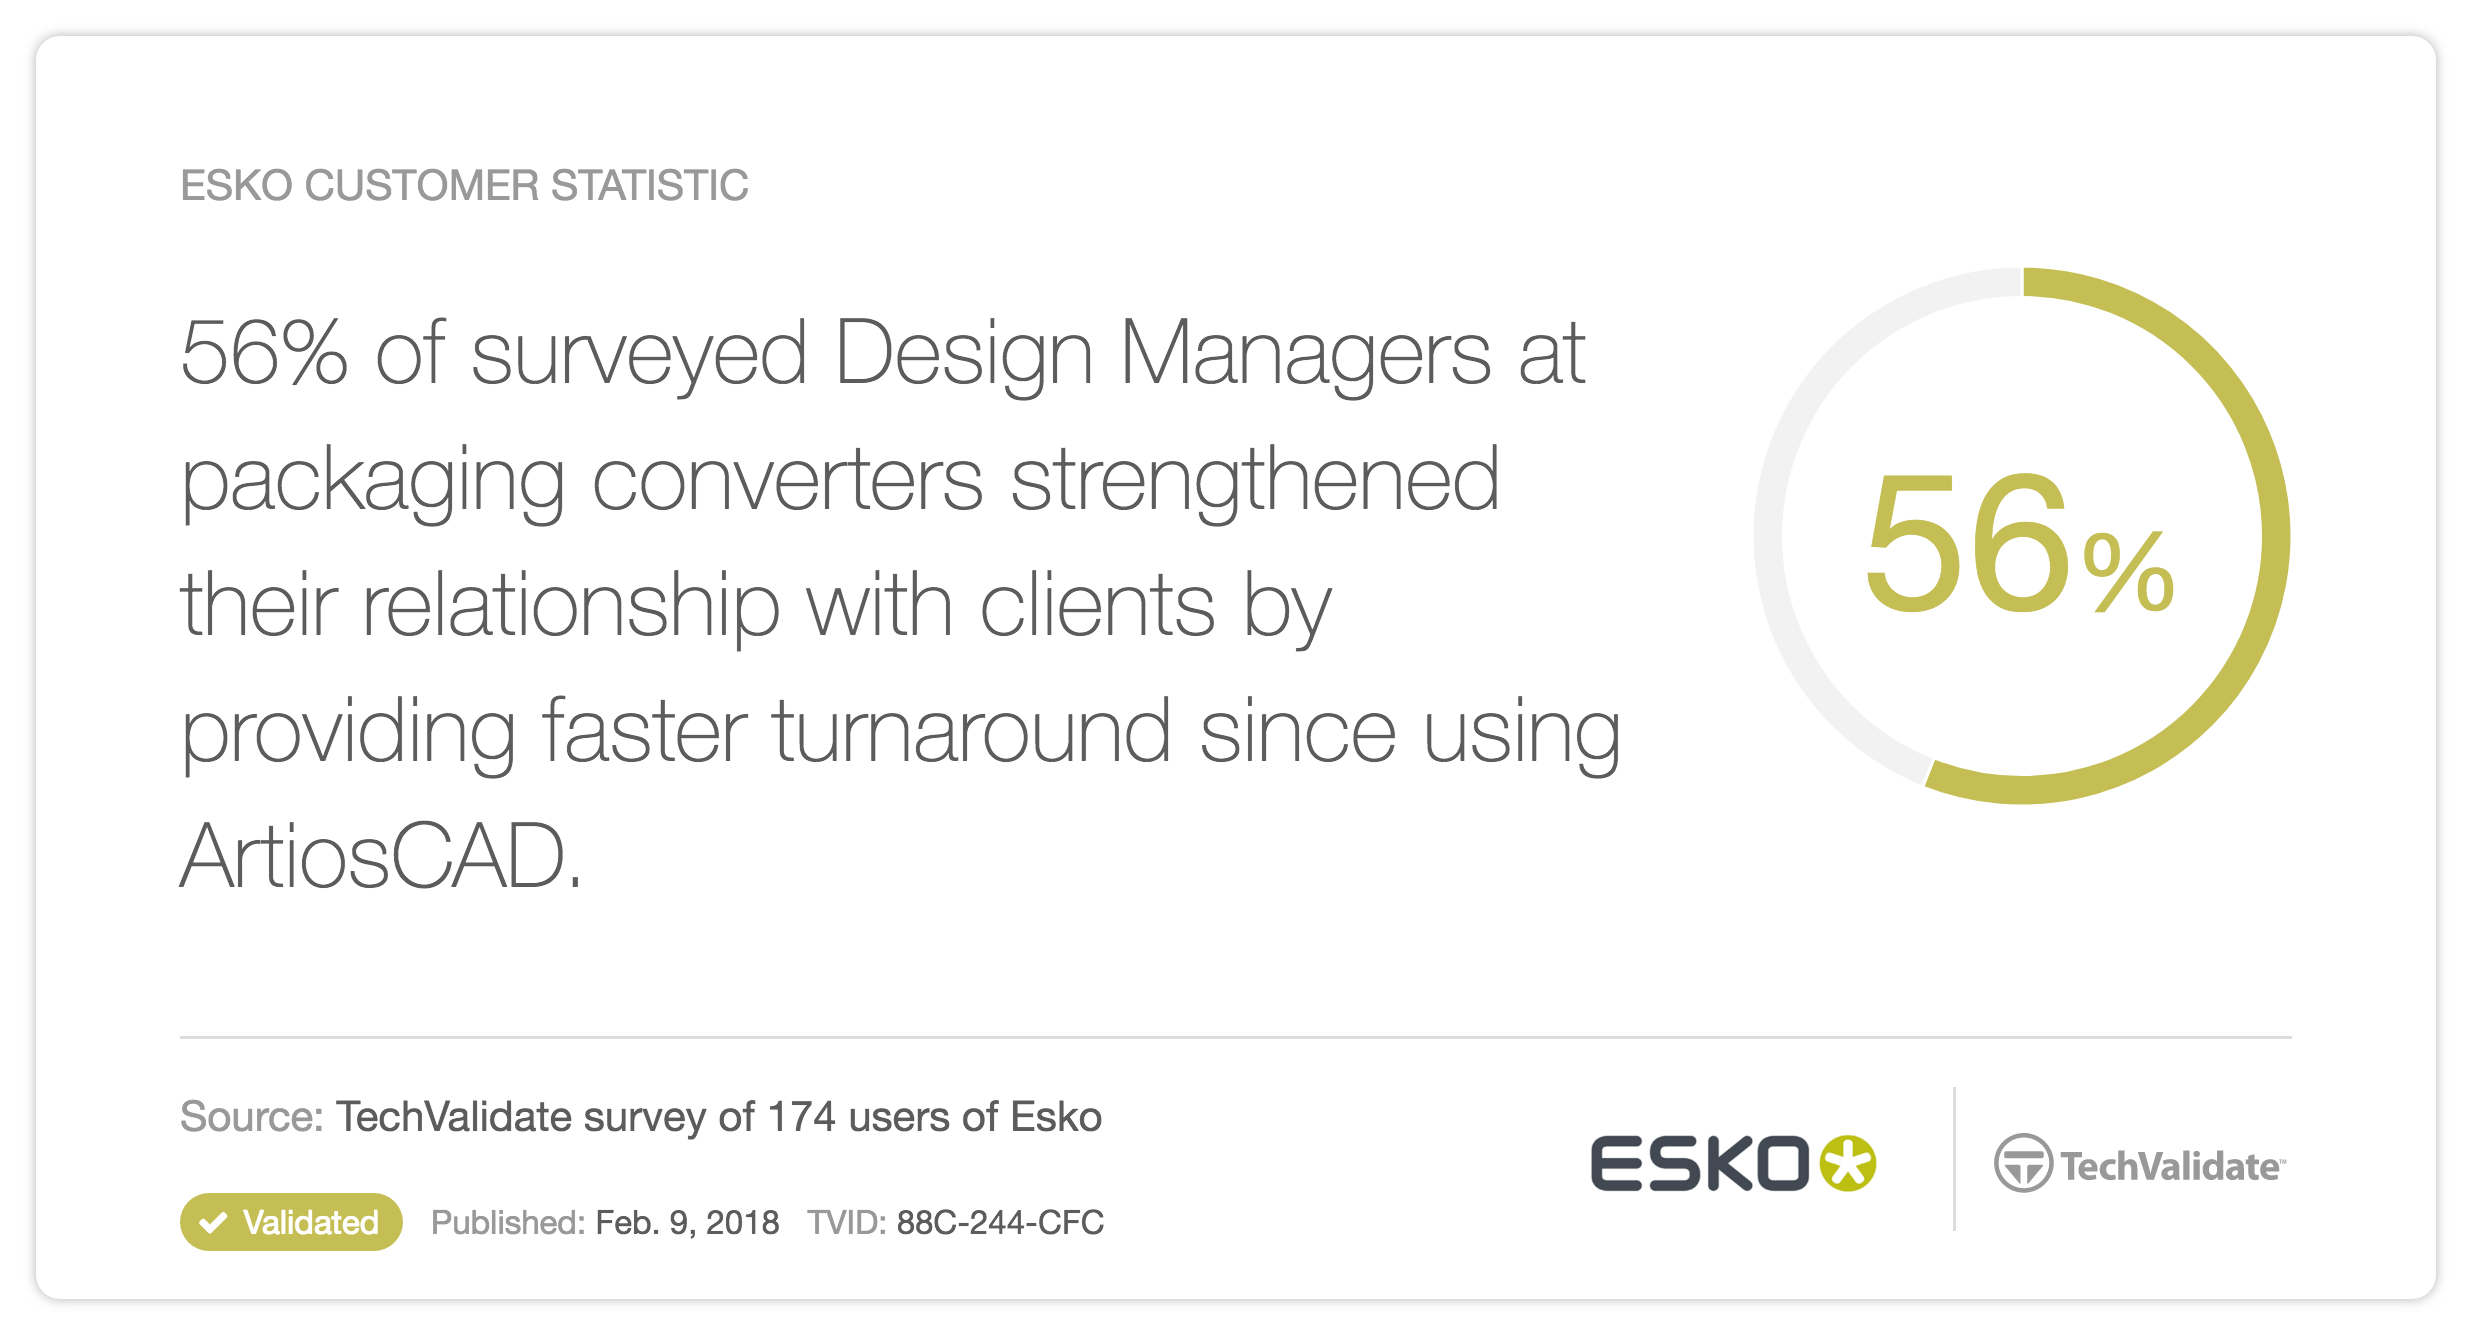 56% of surveyed Design Managers at packaging converters strengthened their relationship with clients by providing faster turnaround since using ArtiosCAD.